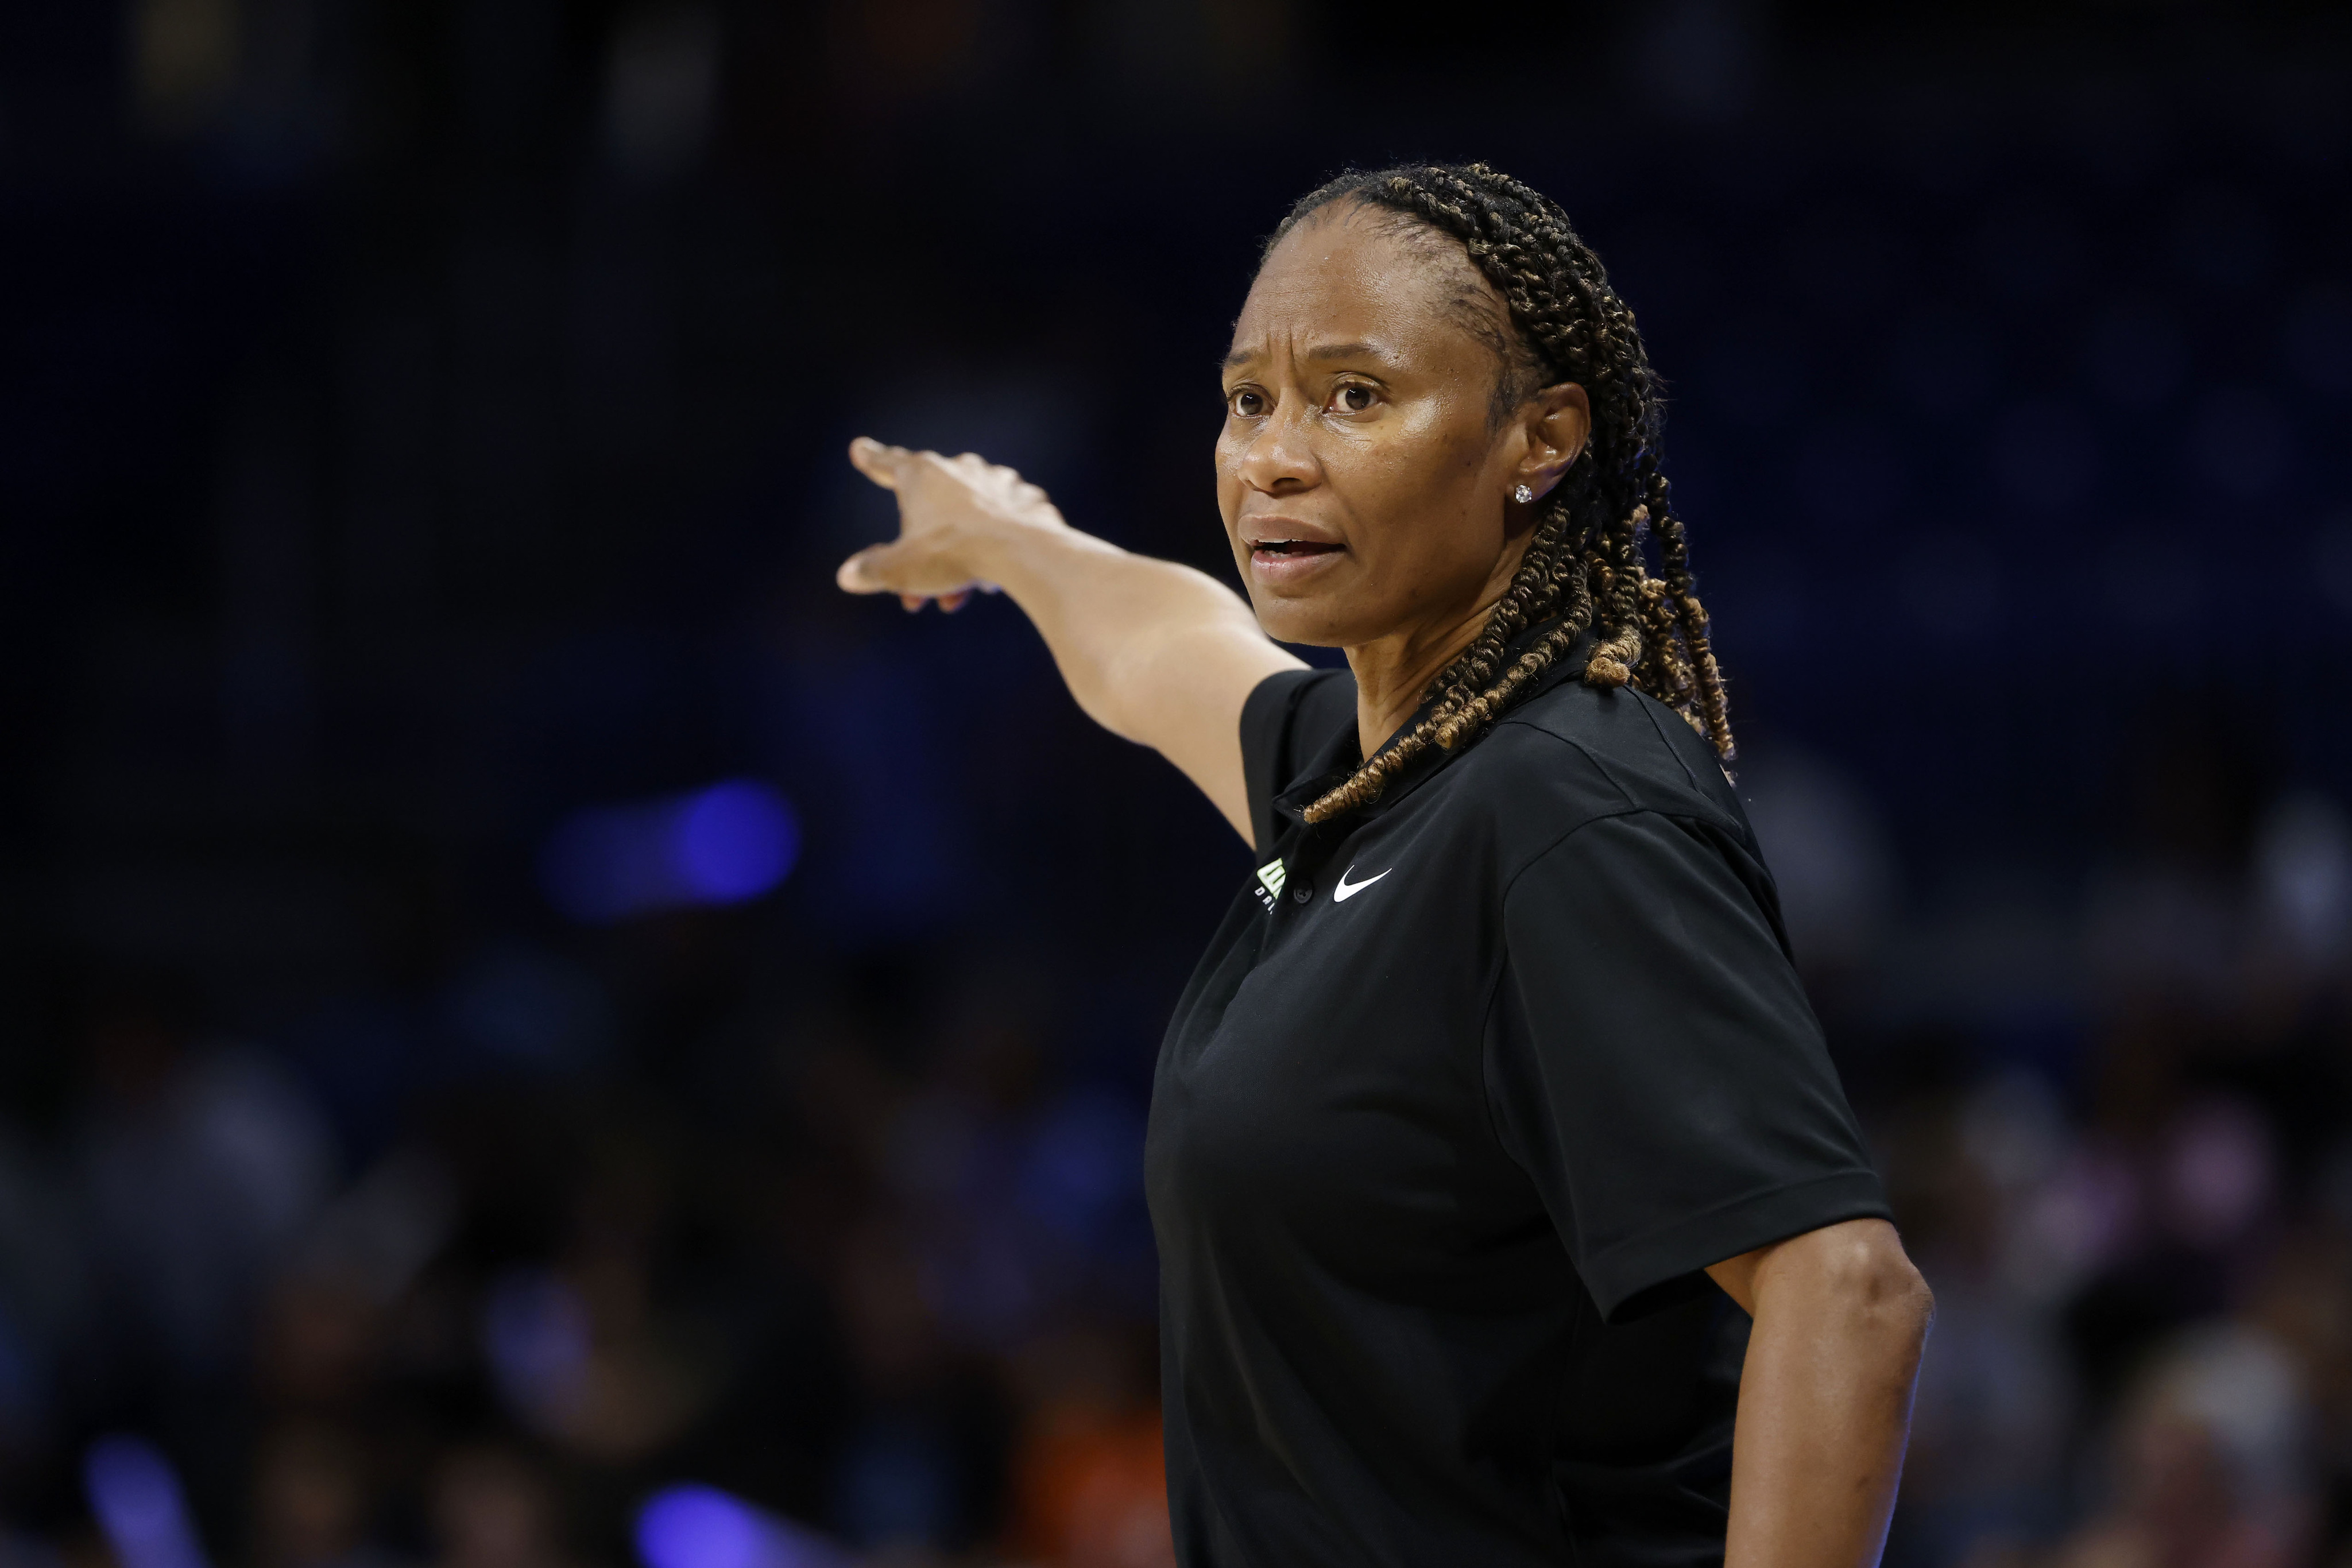 She will not stop': Wings coach Vickie Johnson continues search for elusive  championship